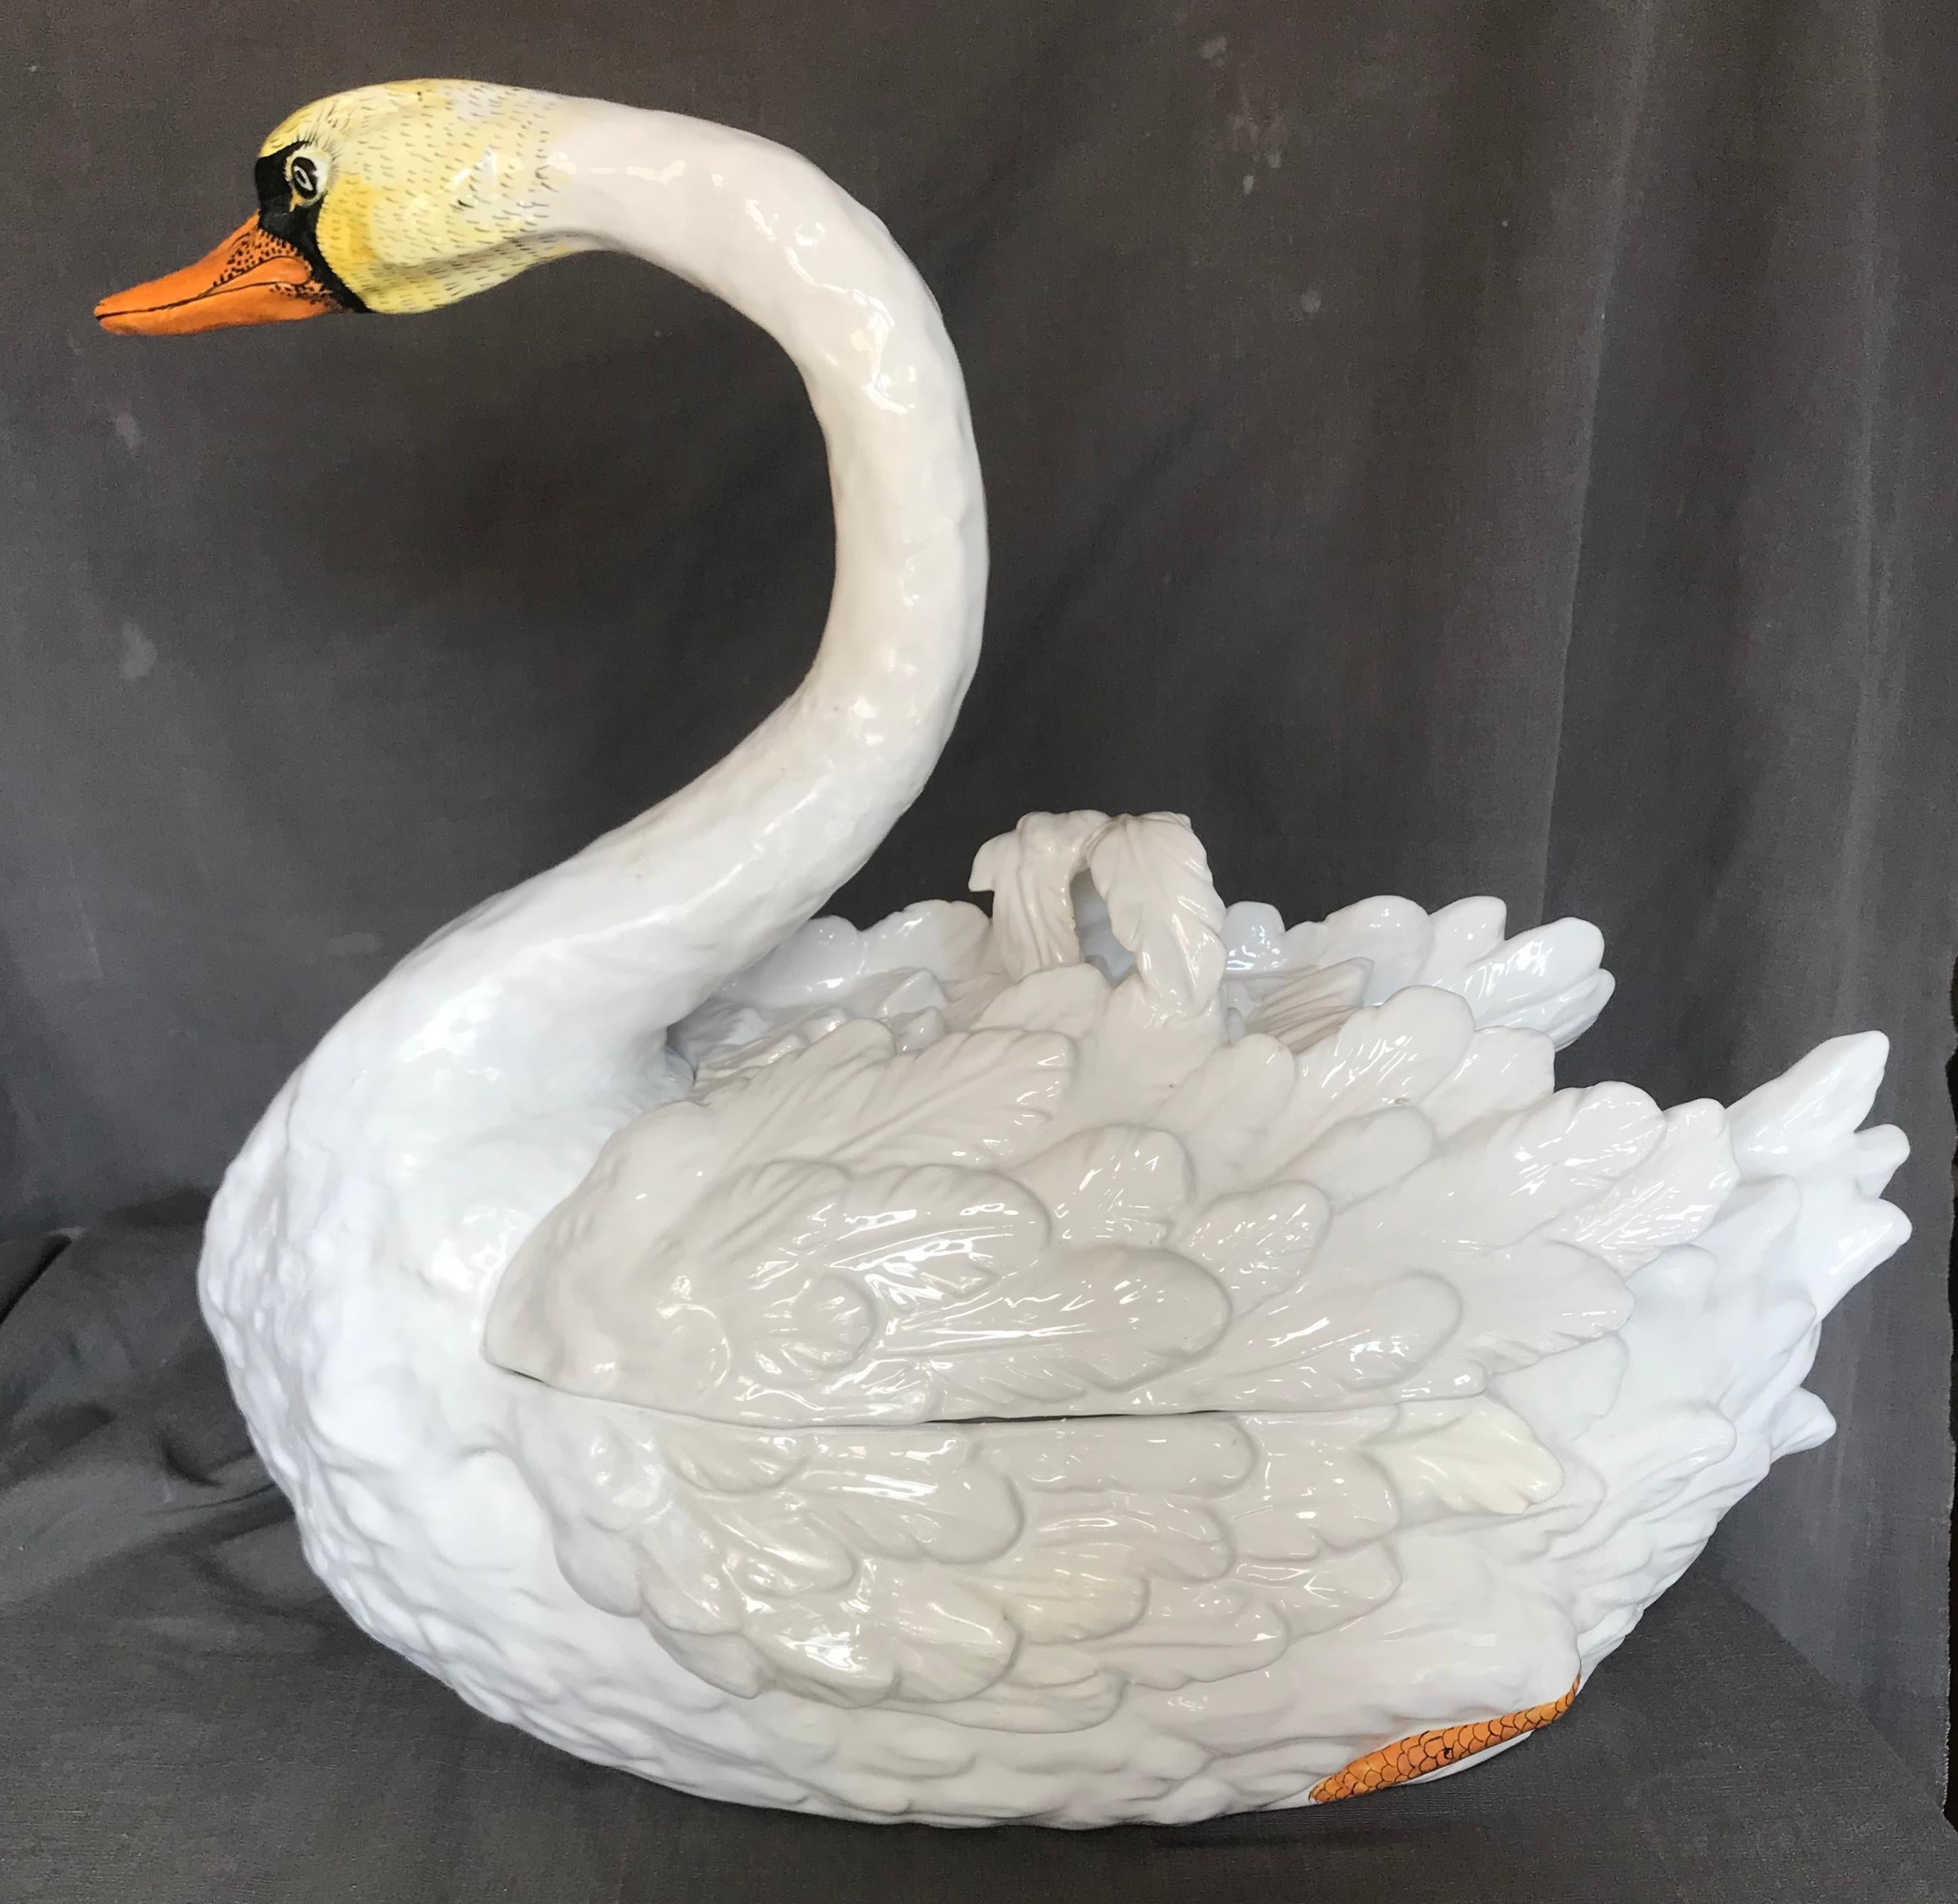 Bassano swan tureen Large decorative ceramic tureen with feather handled lid in the form of a life-size swan; repairs and overpainting. Purely decorative placed in the rafters of a great room or on top of an armoire. Stamped Bassano. Italy, mid-20th